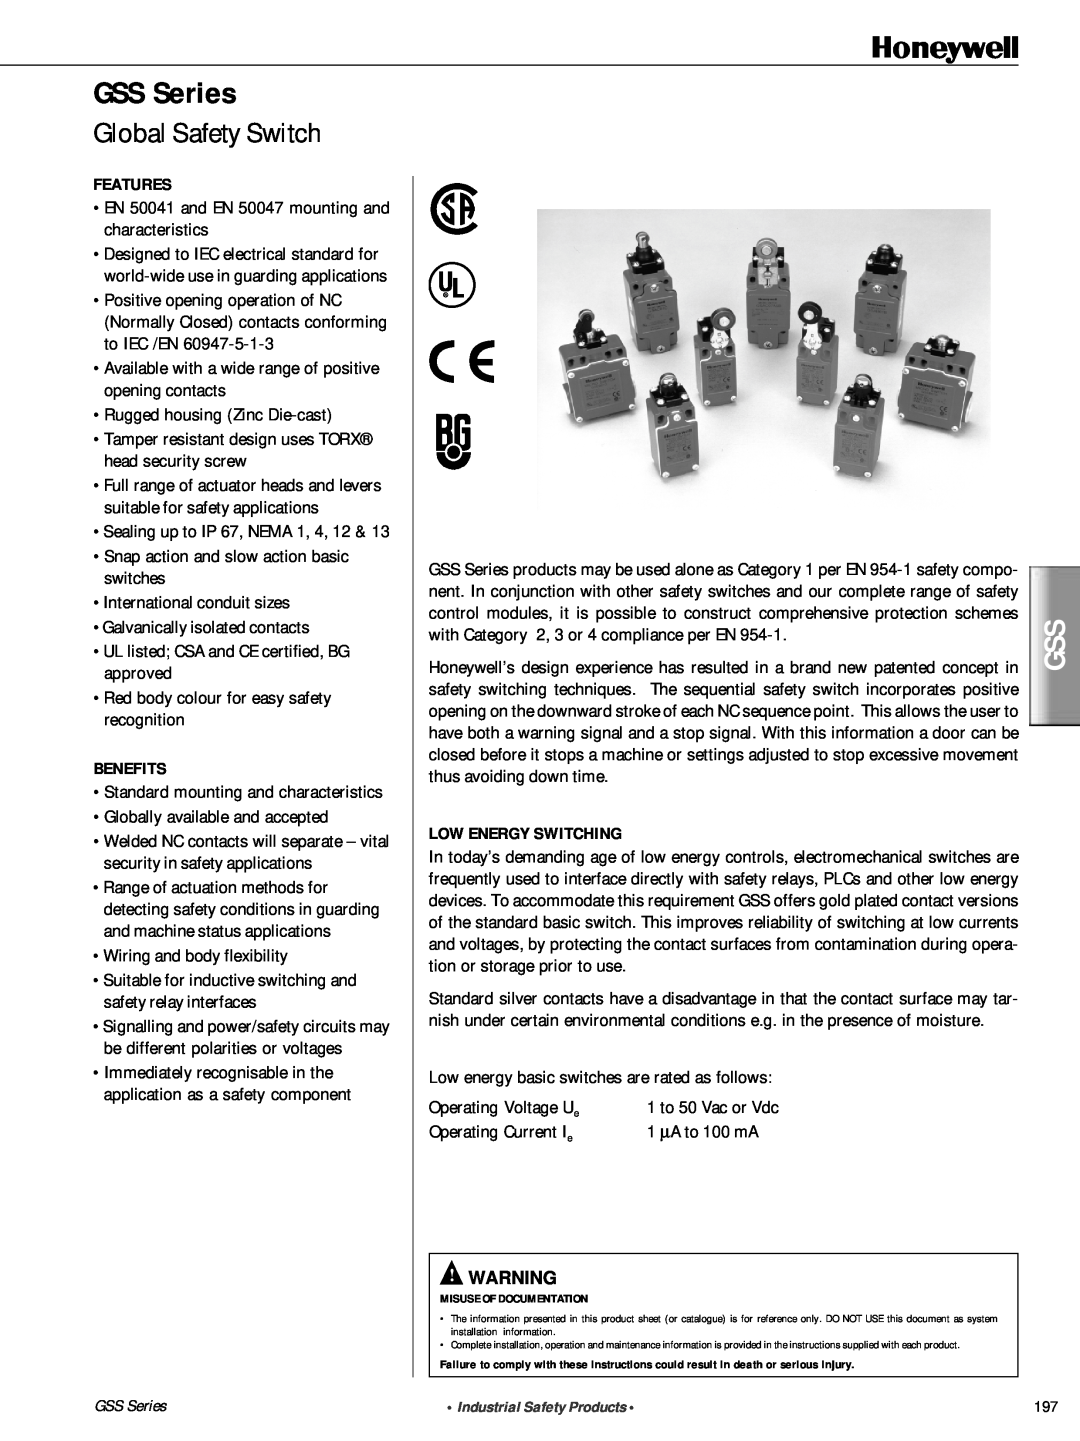 Honeywell GSS Series manual Global Safety Switch, Features, Benefits, Low Energy Switching 